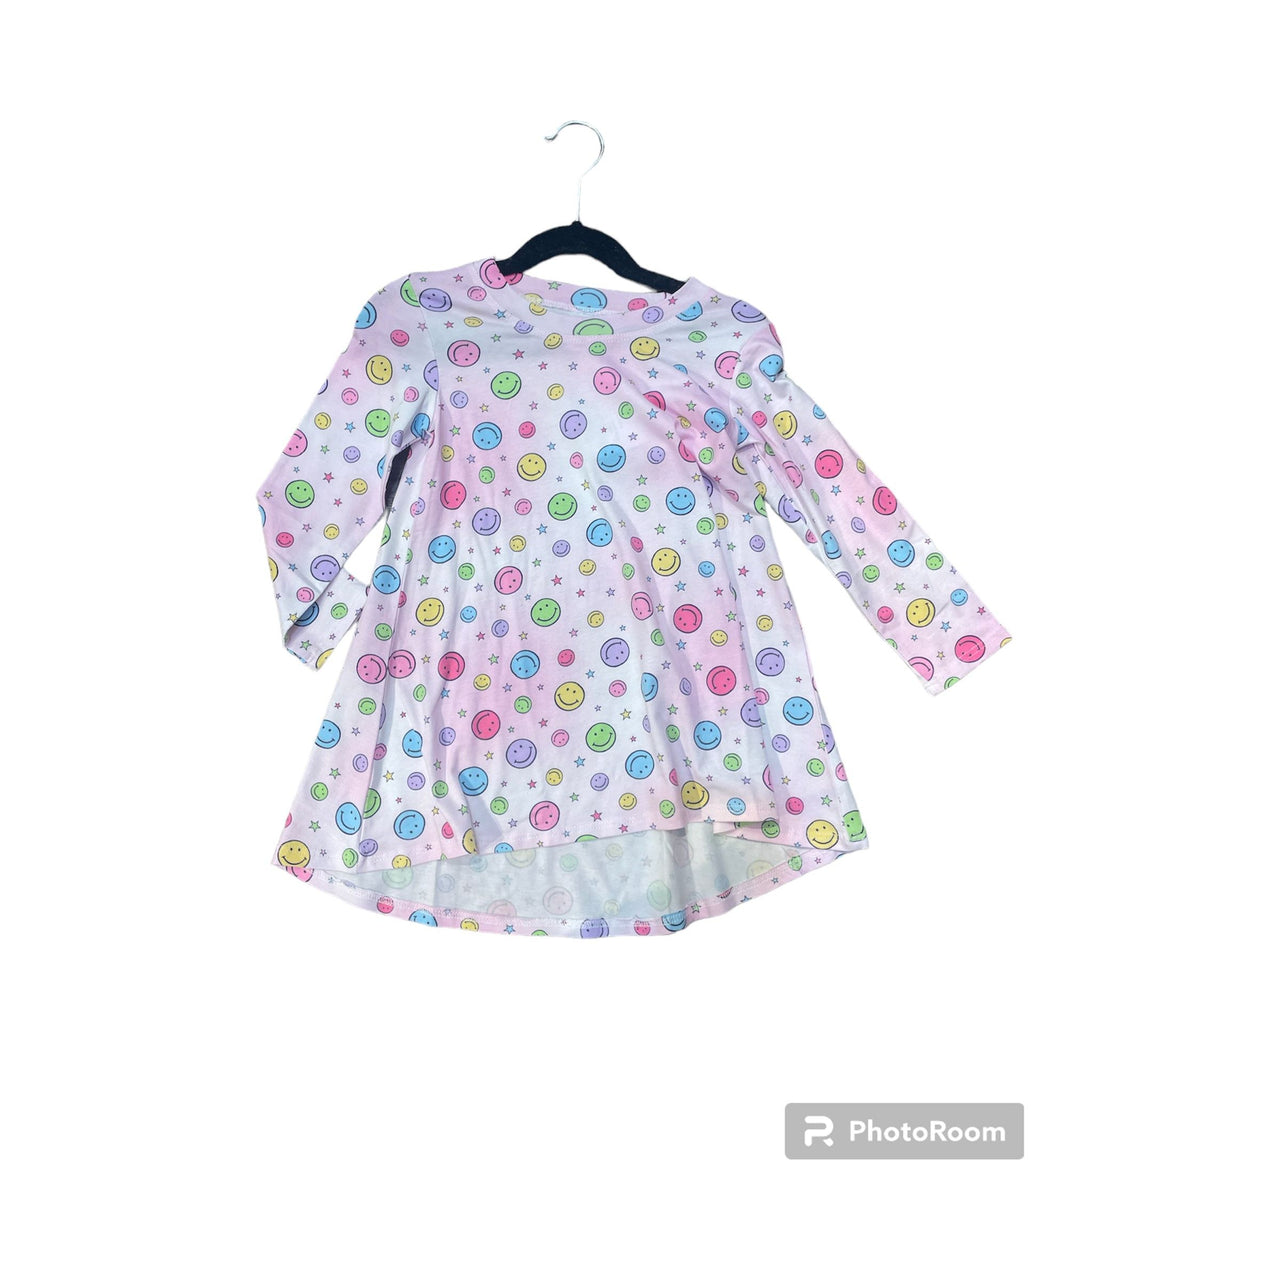 L/s night dress-happy smiley face